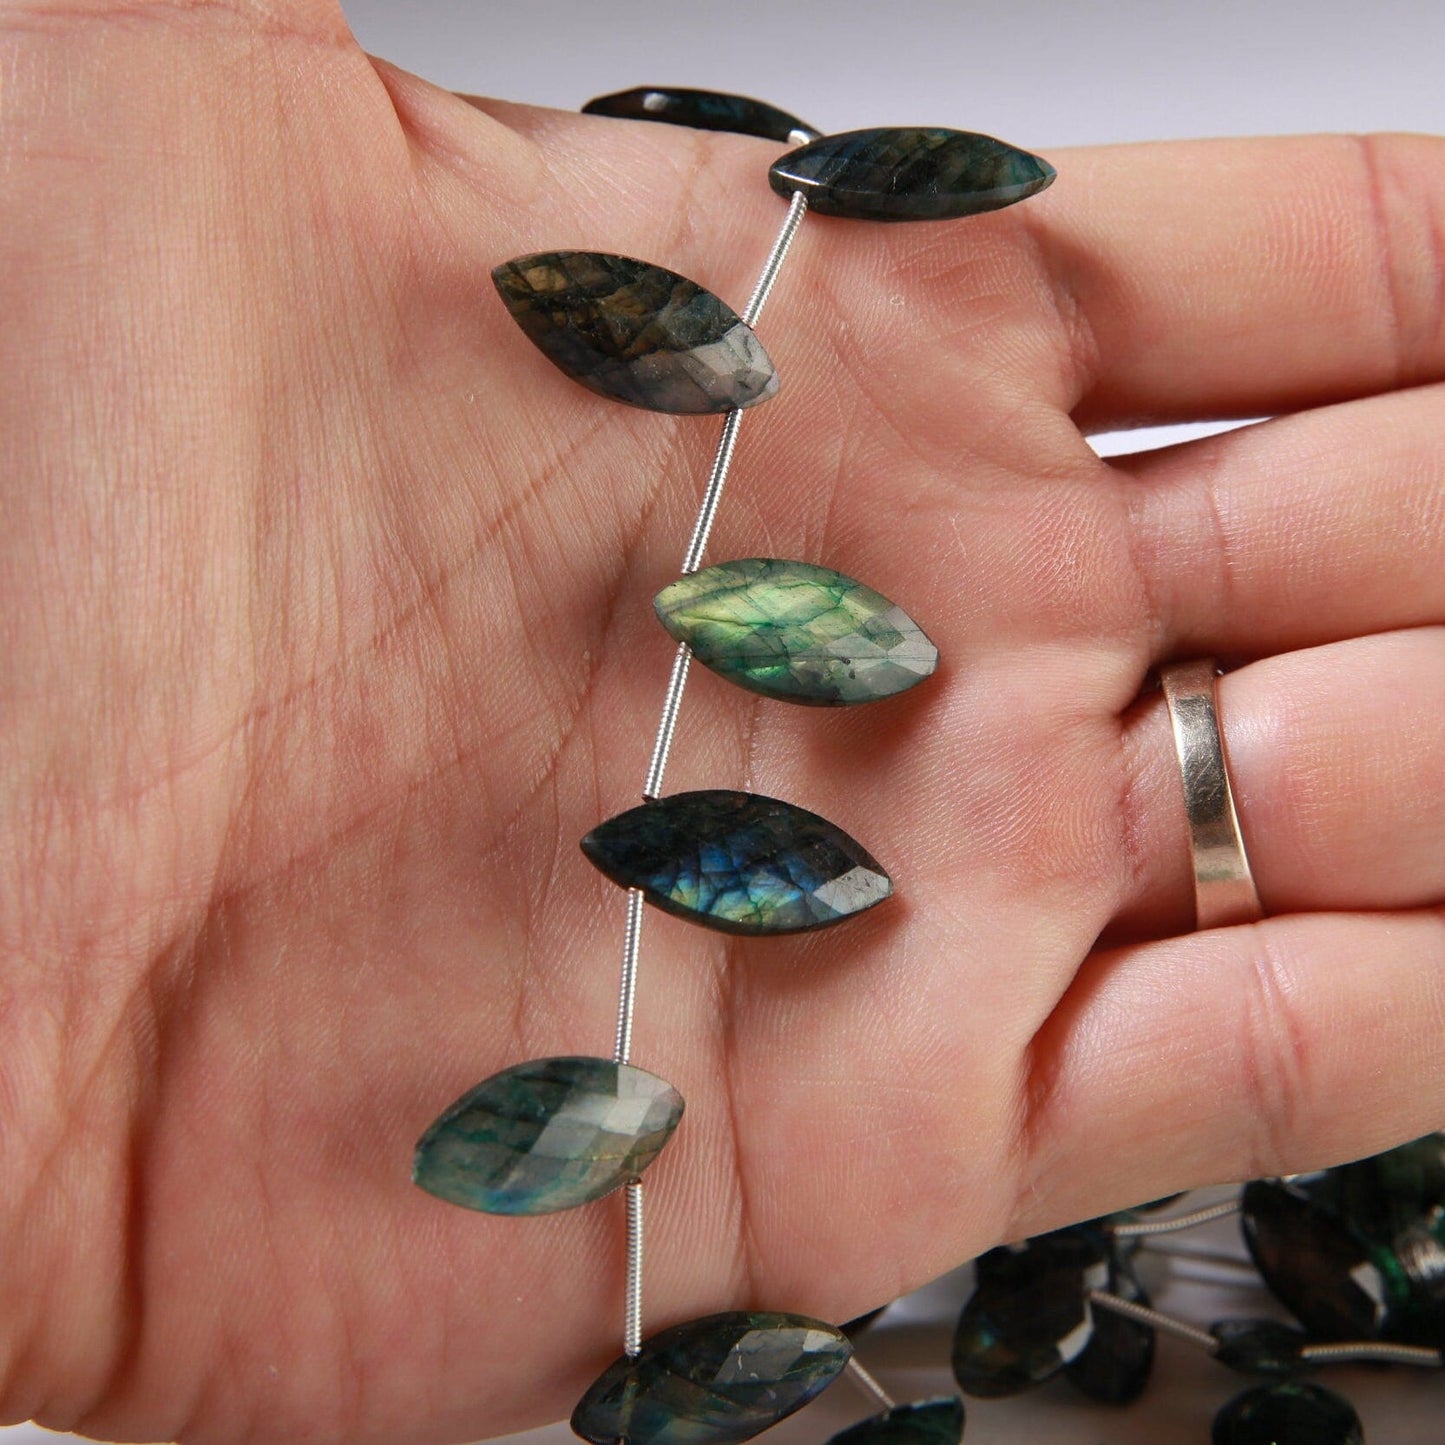 Natural Labradorite Faceted Marquise Drop Beads Blue Green Flashy 8x15-17mm Gemstone 10 pcs ,Jewelry Making Beads